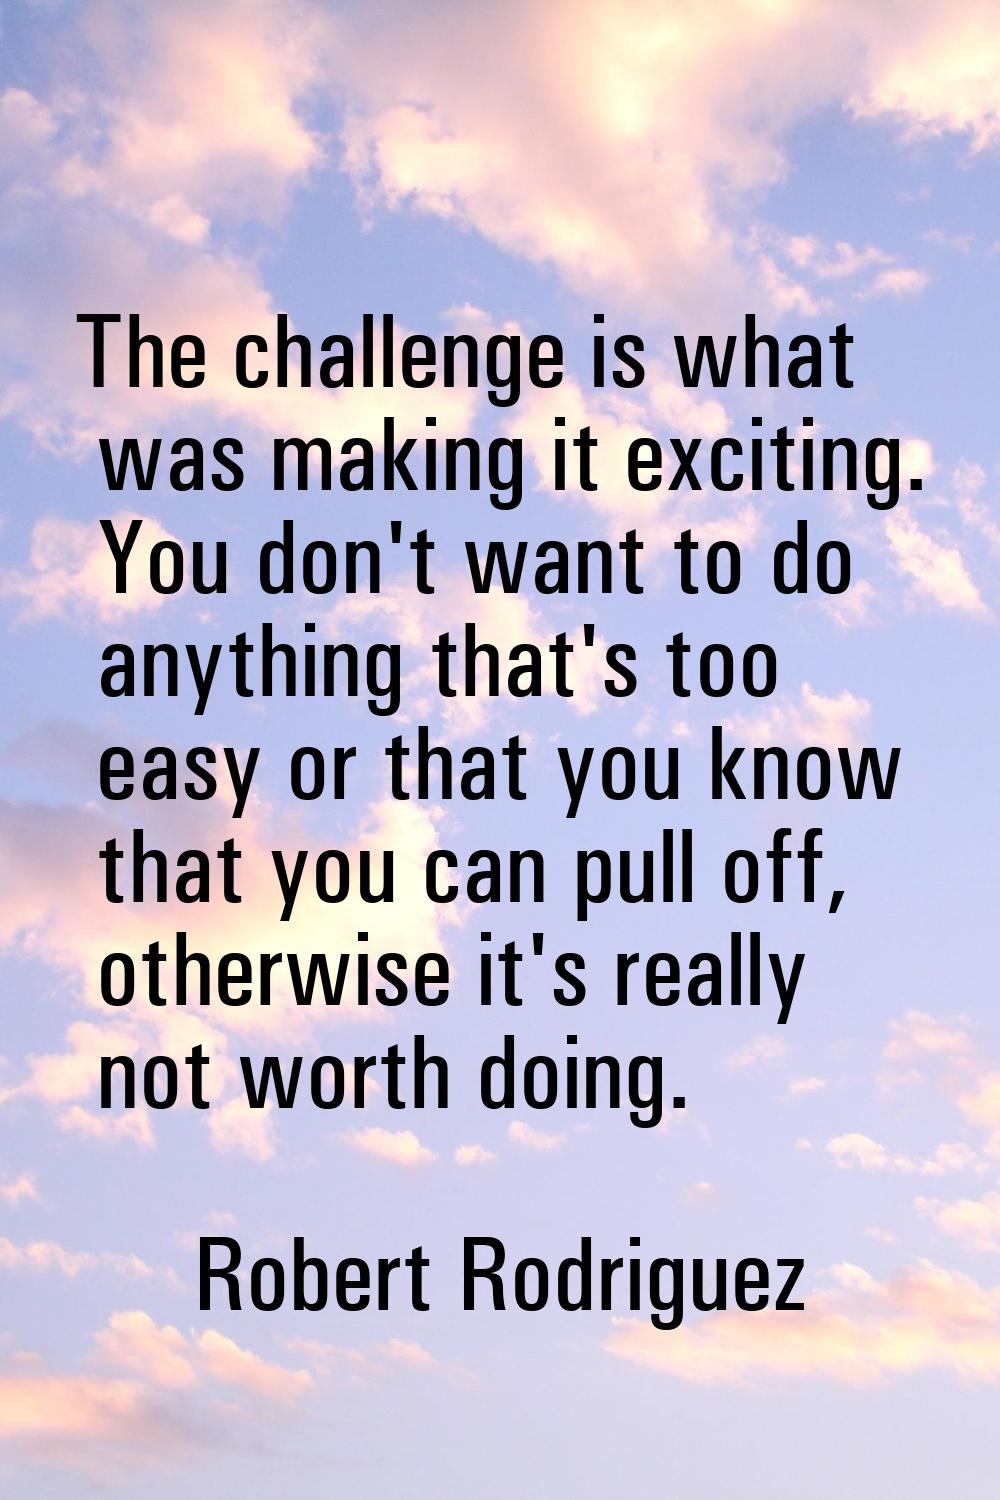 The challenge is what was making it exciting. You don't want to do anything that's too easy or that